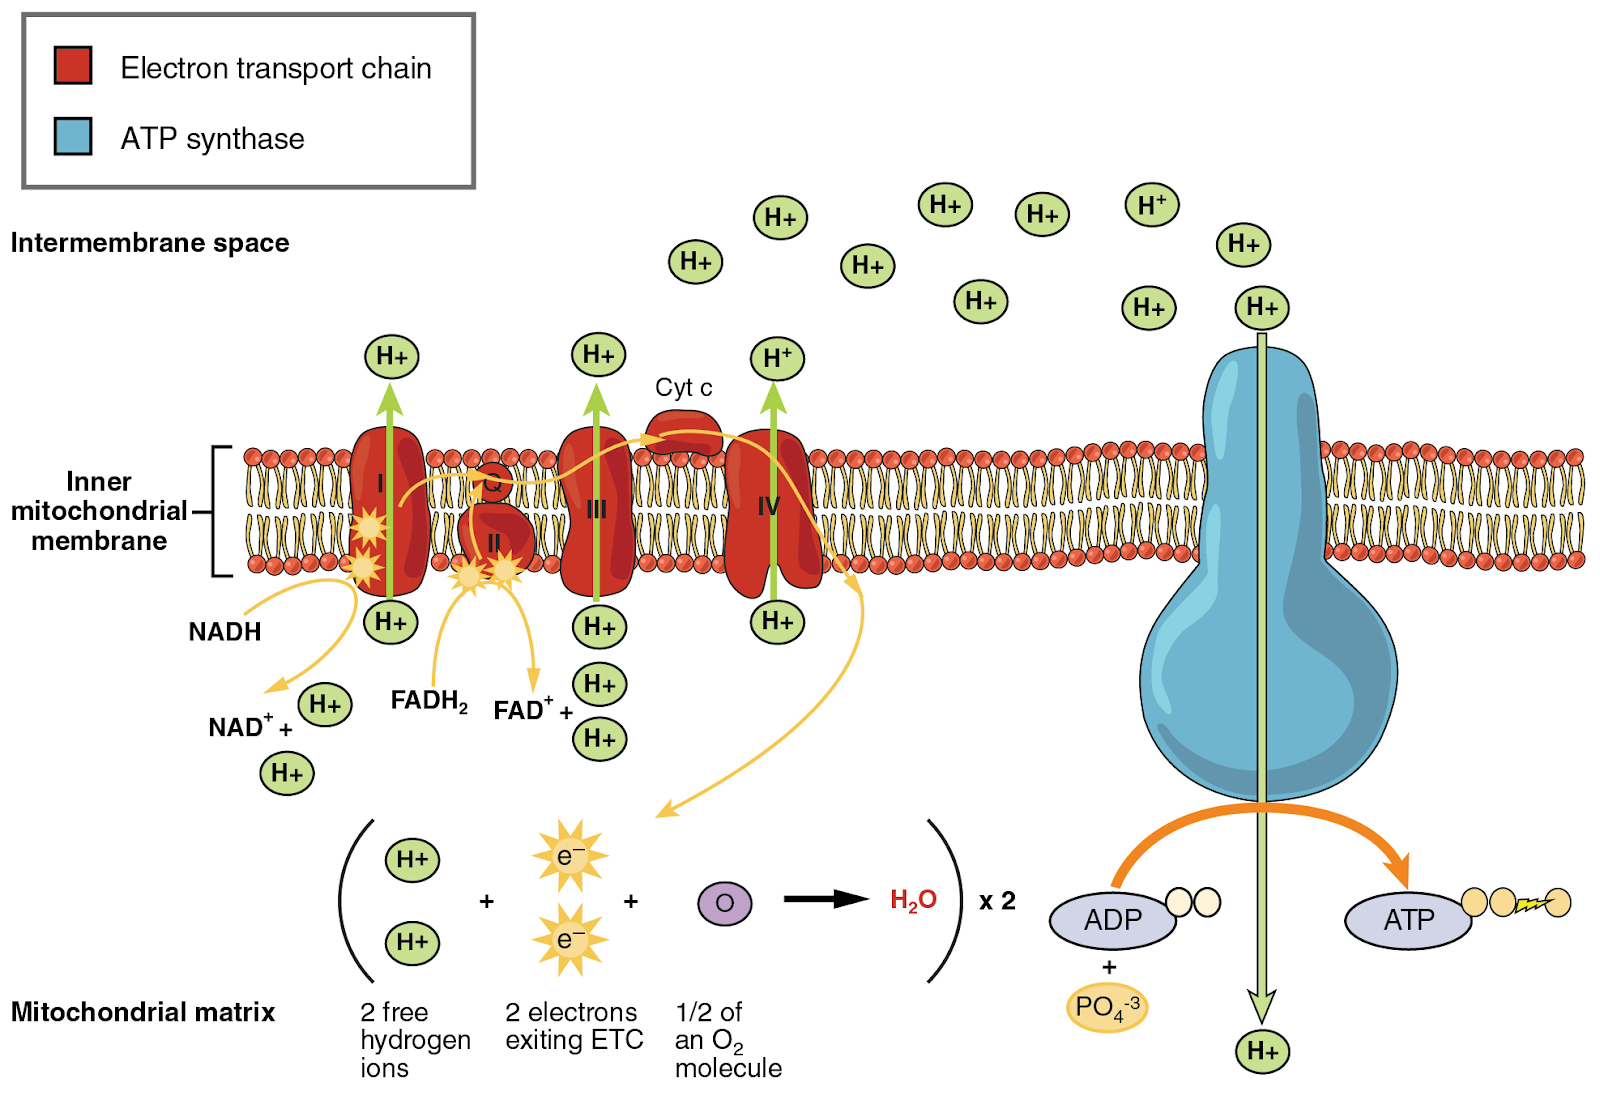 A detailed diagram of the electron transport chain (ETC).